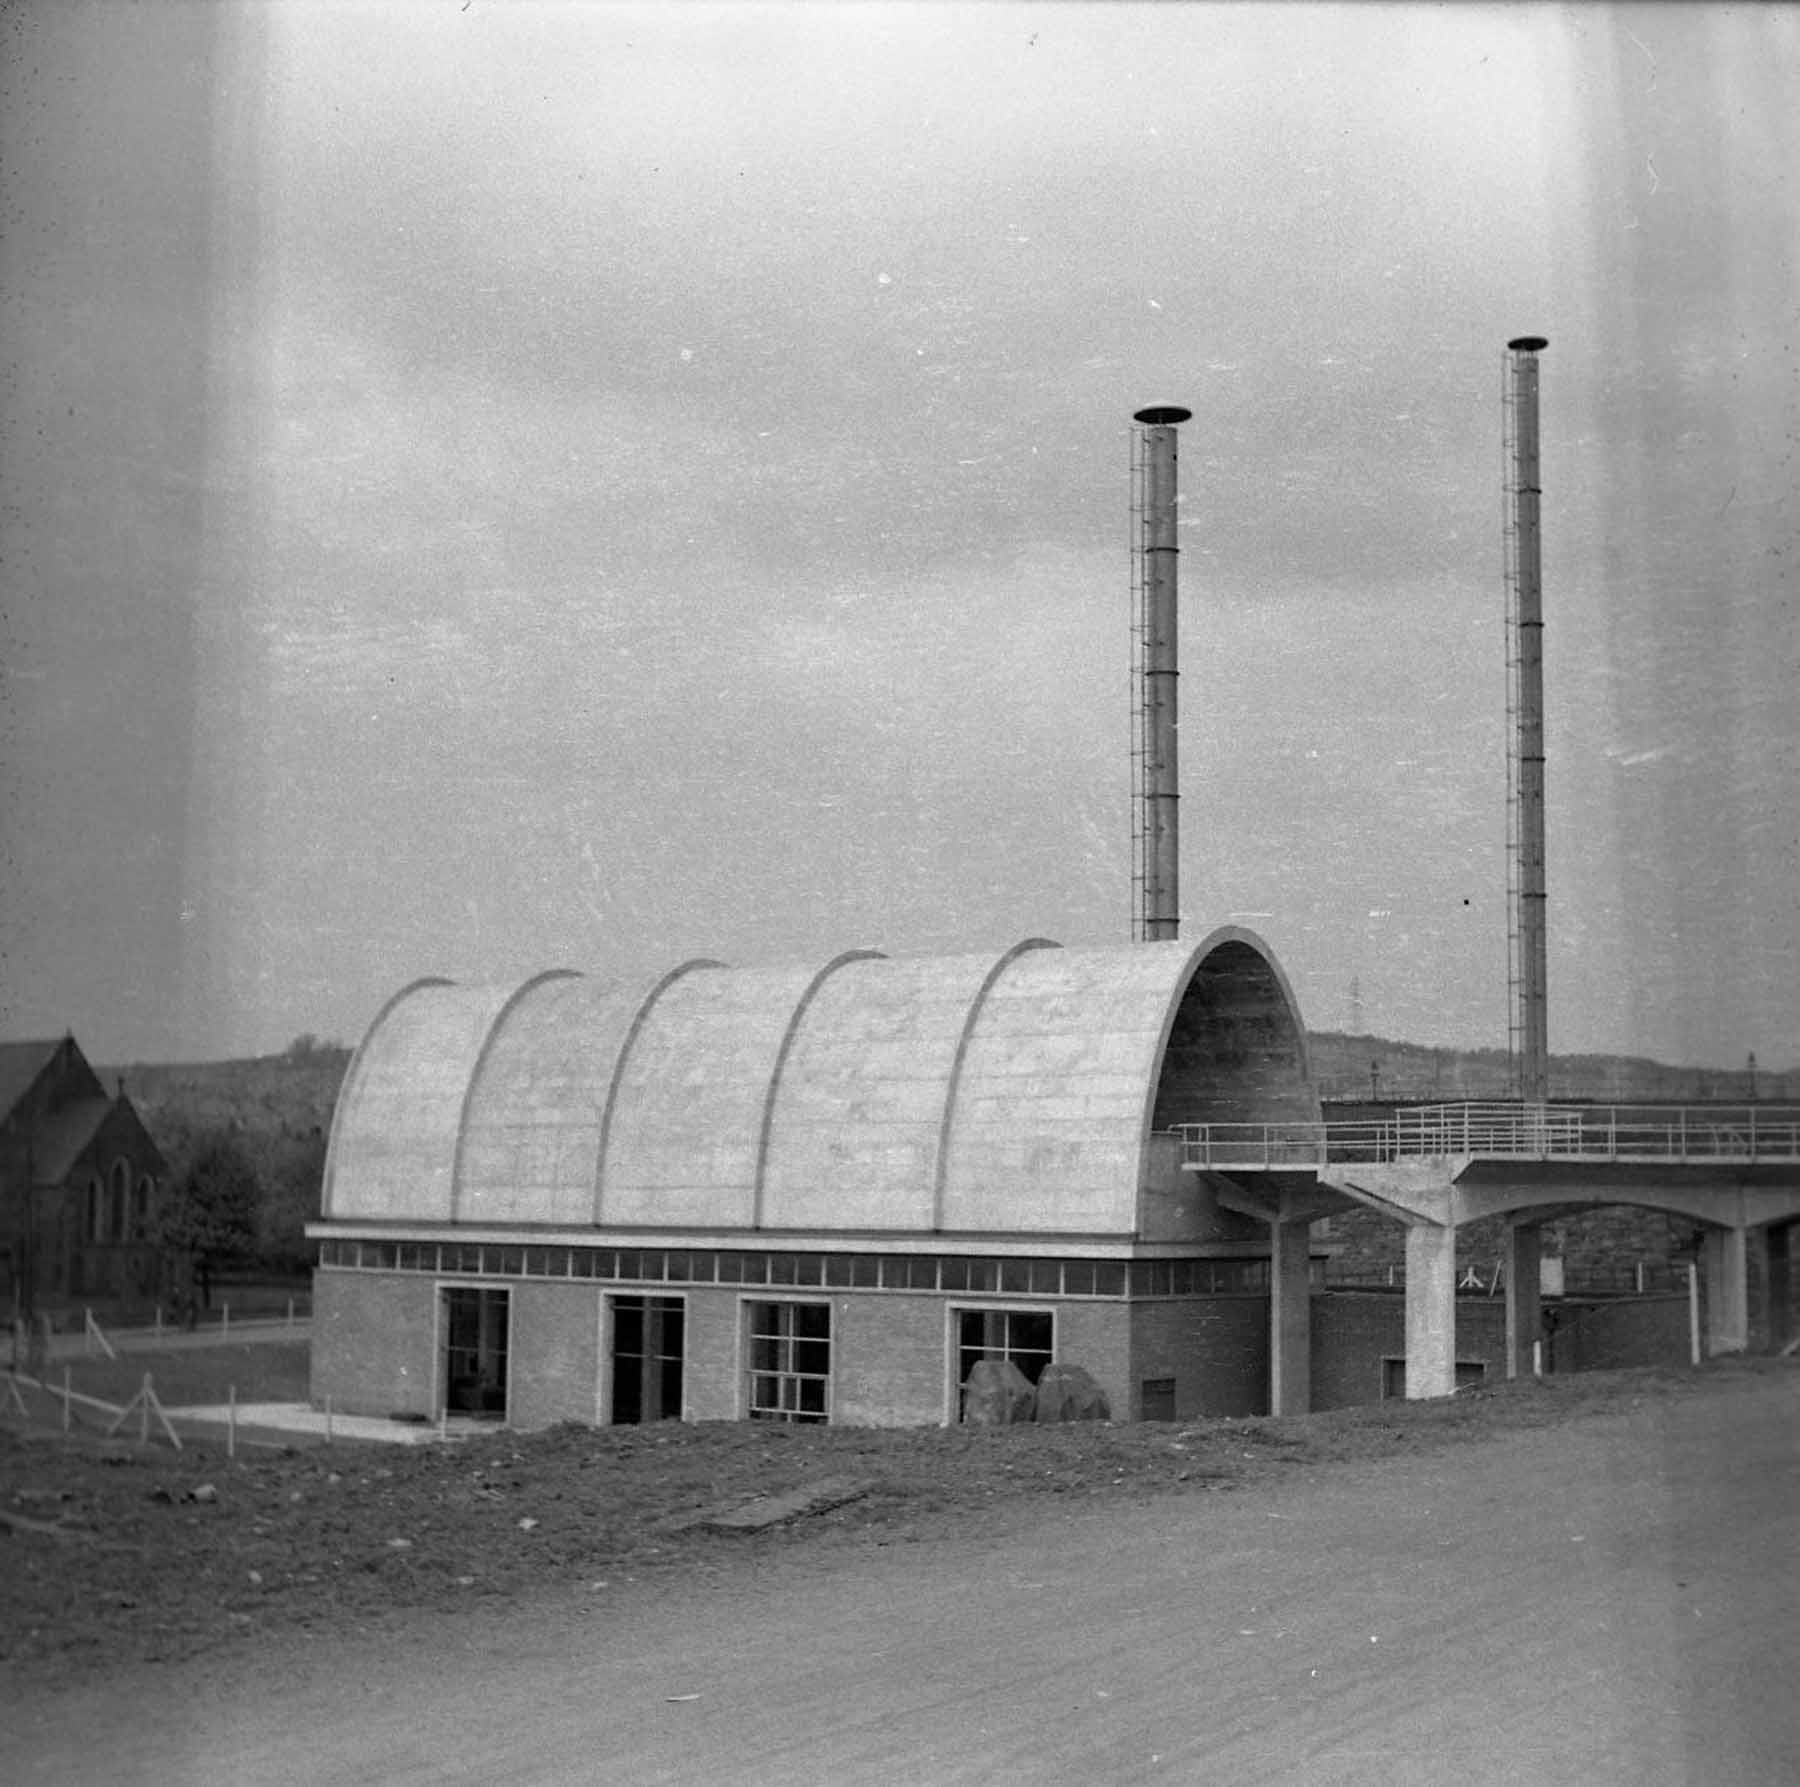 Brynmawr Rubber Factory, Gwent, Wales, 1947. Architects' Co-Partnership